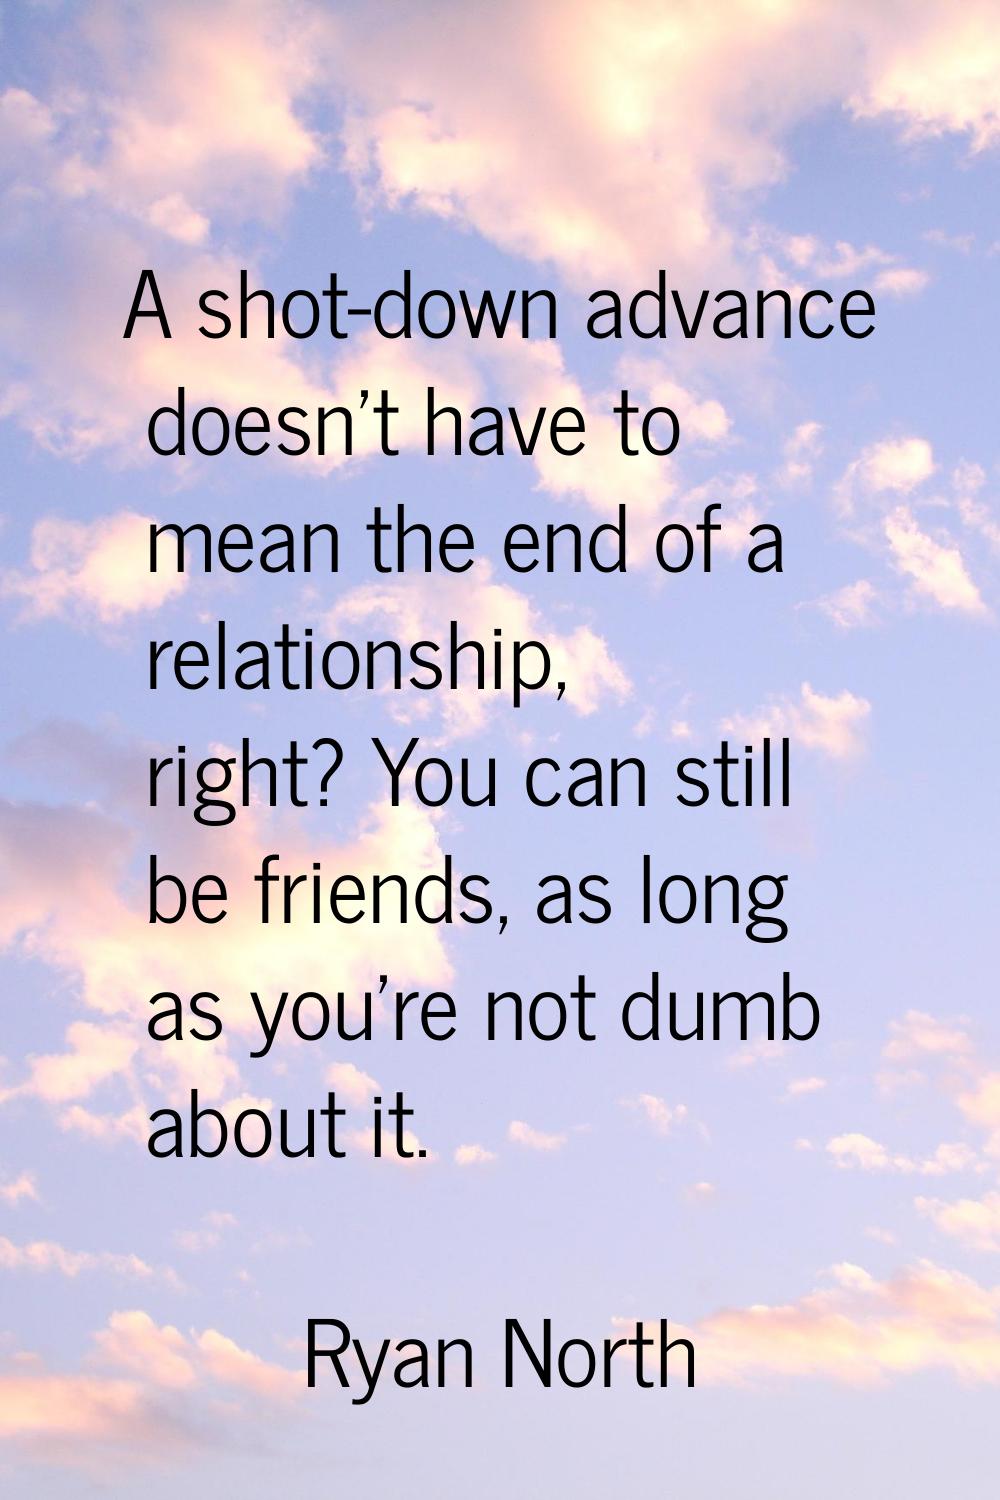 A shot-down advance doesn't have to mean the end of a relationship, right? You can still be friends